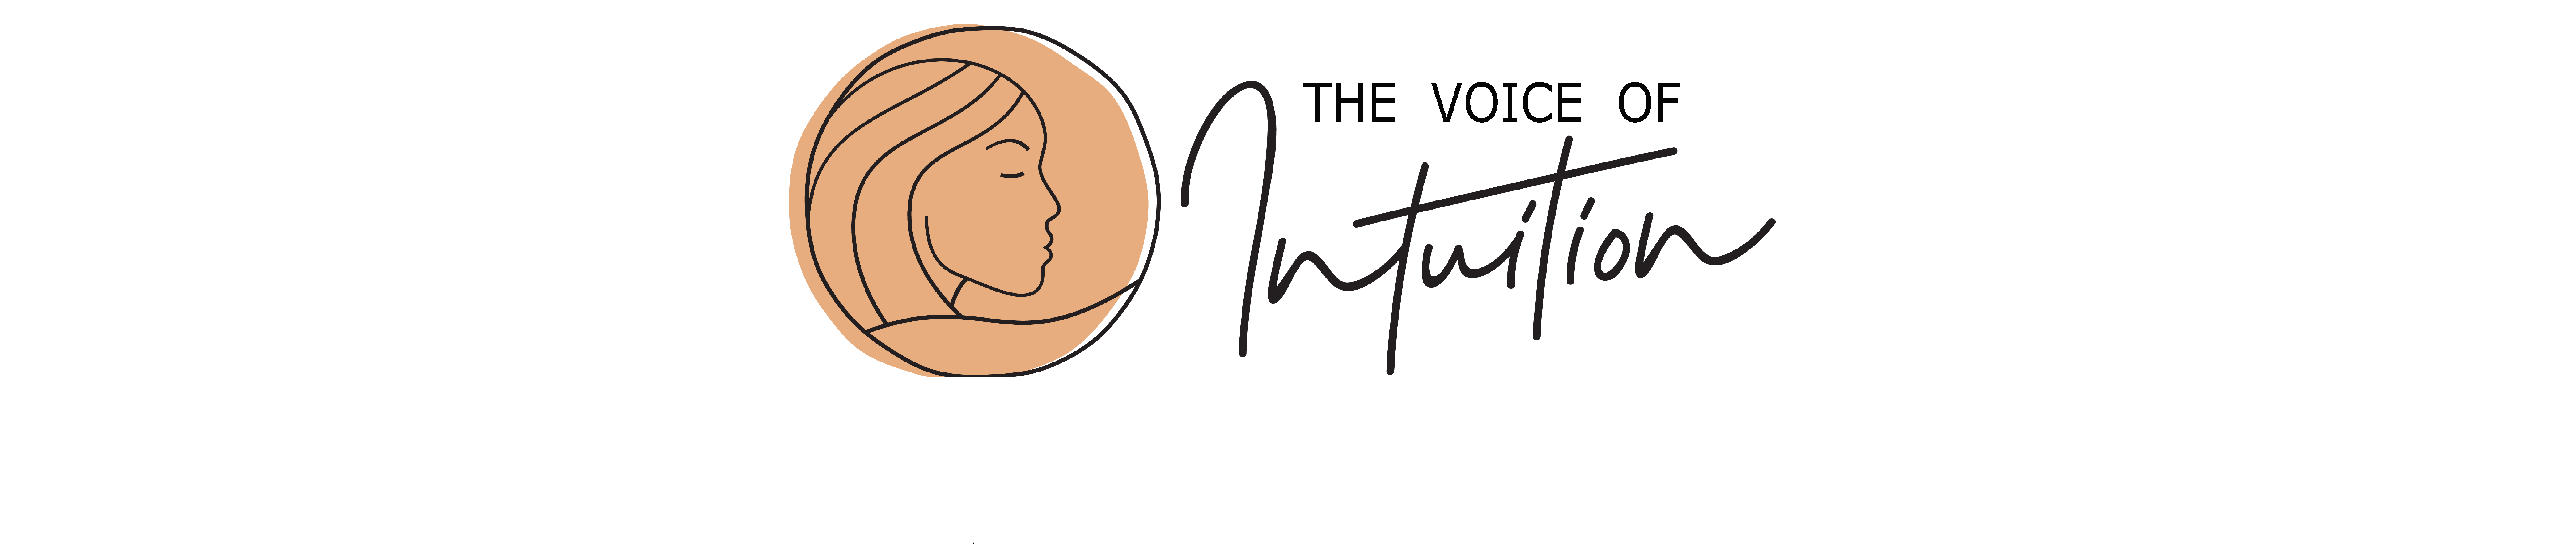 The Voice of Intuition Show